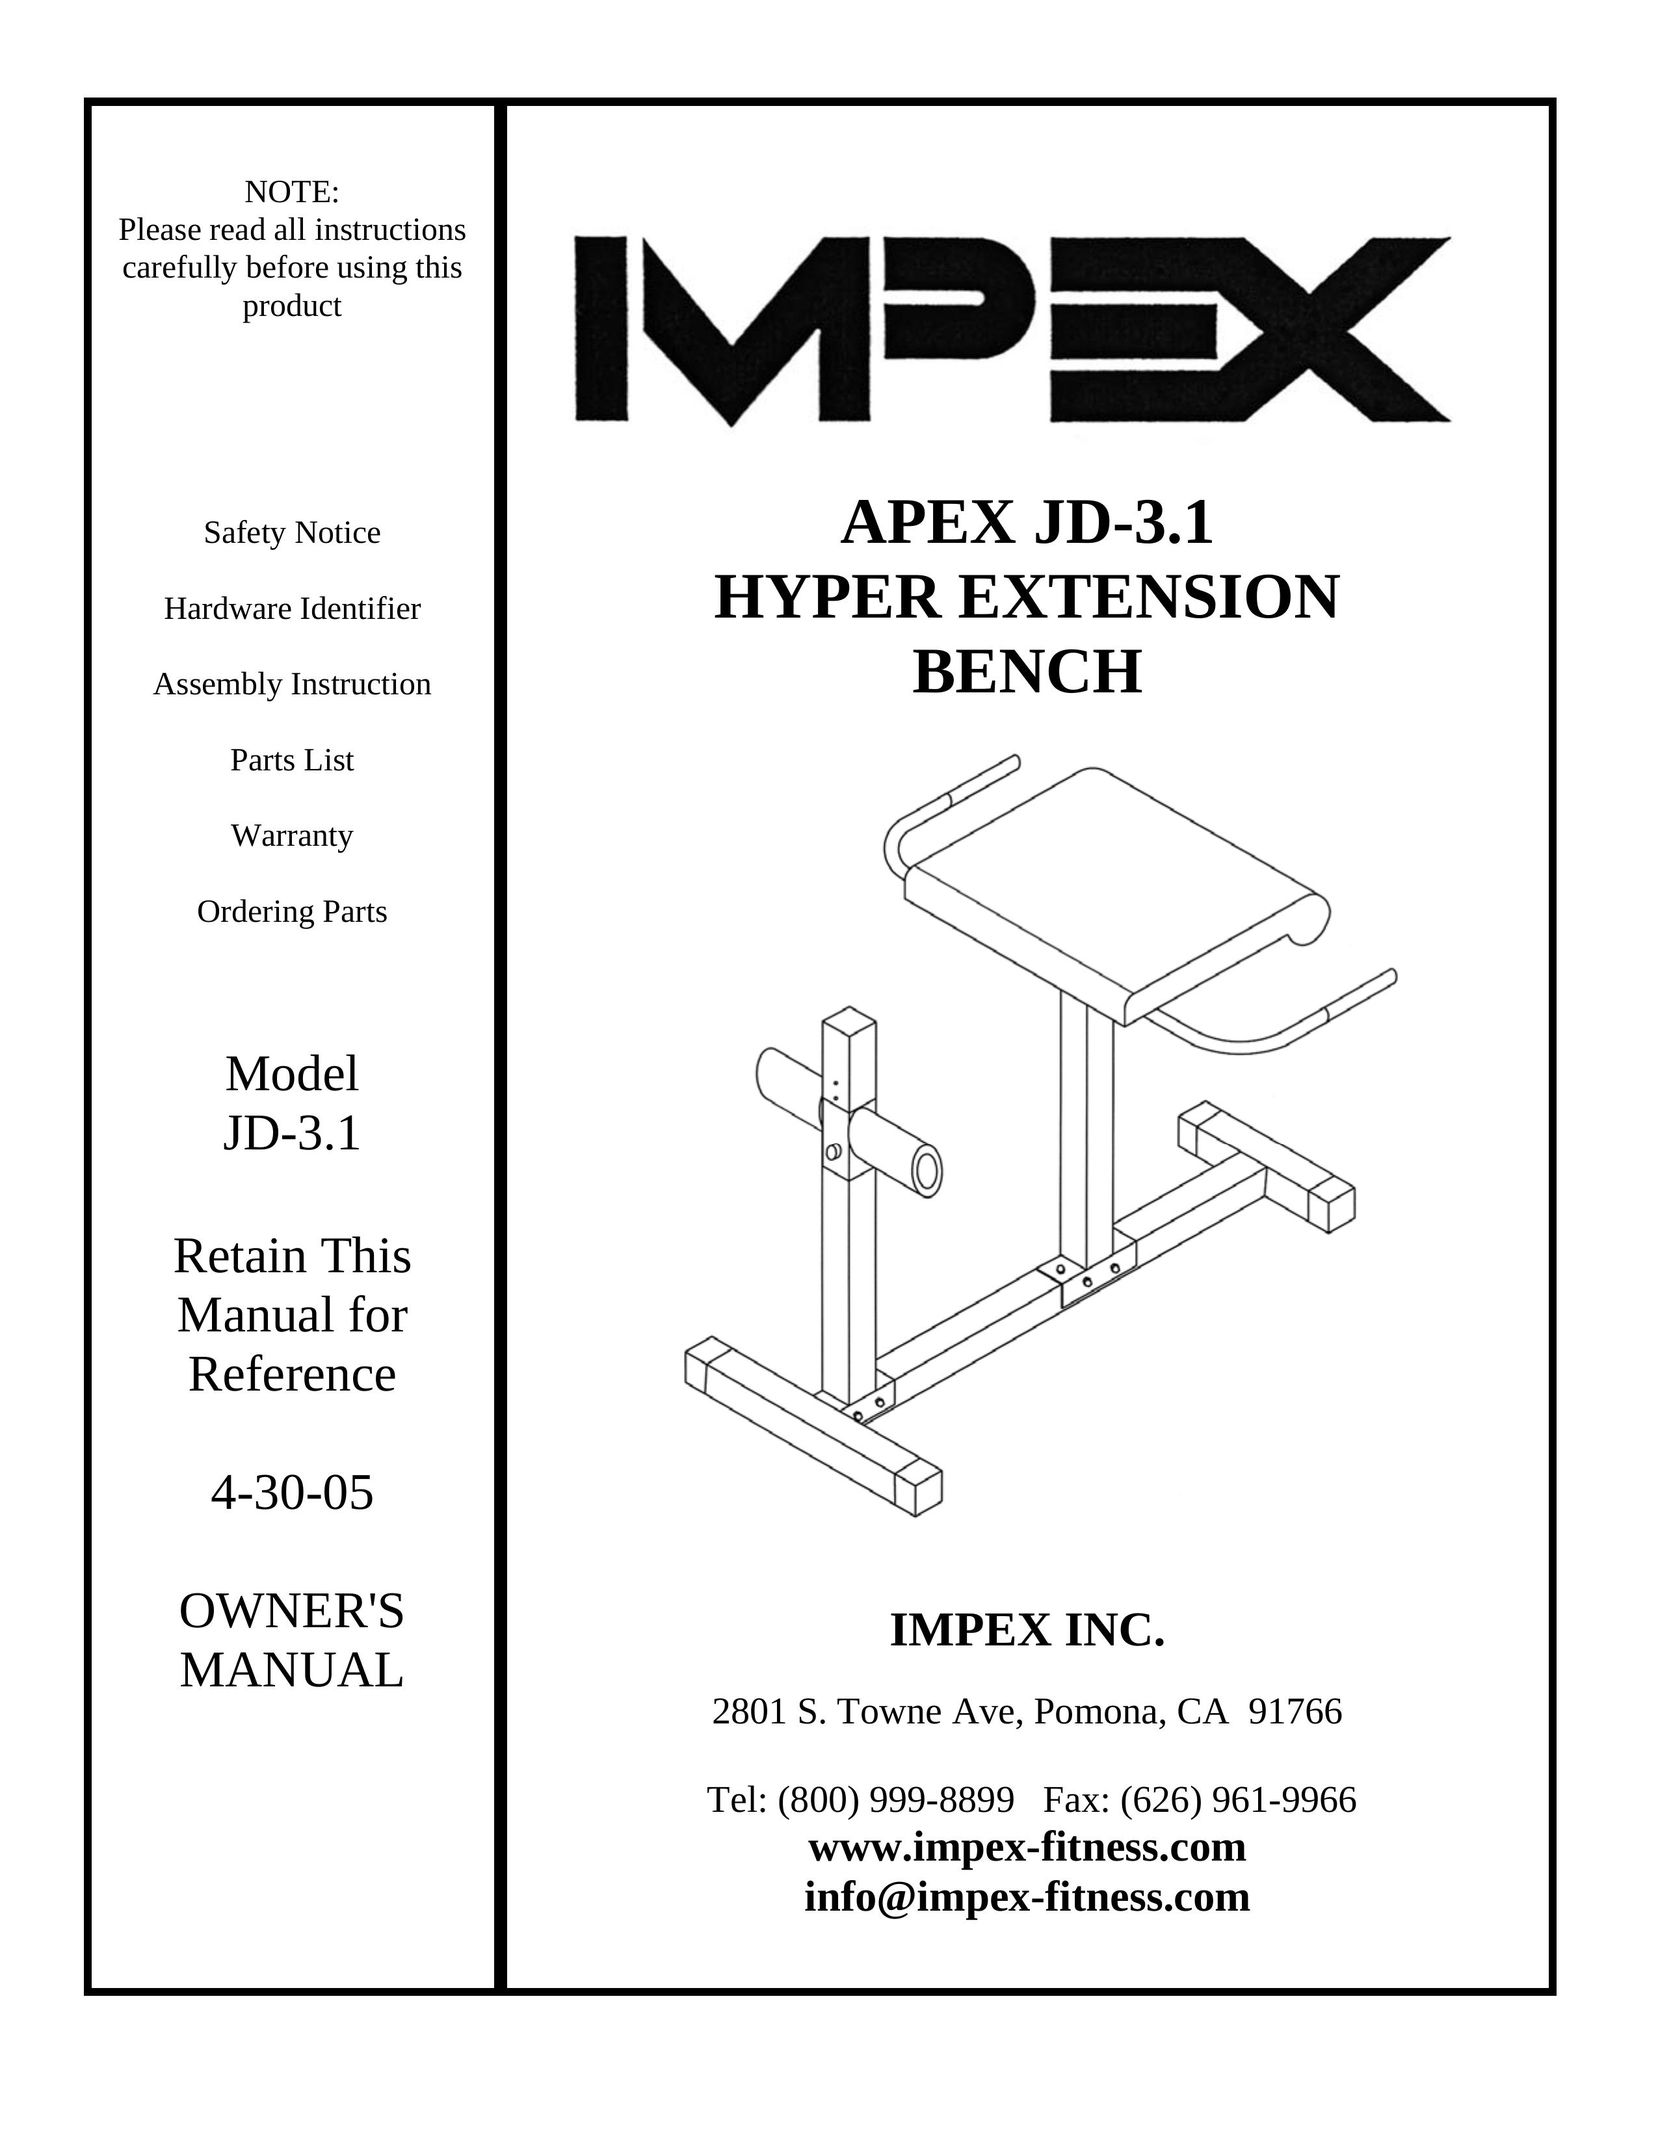 Impex JD-3.1 Fitness Equipment User Manual